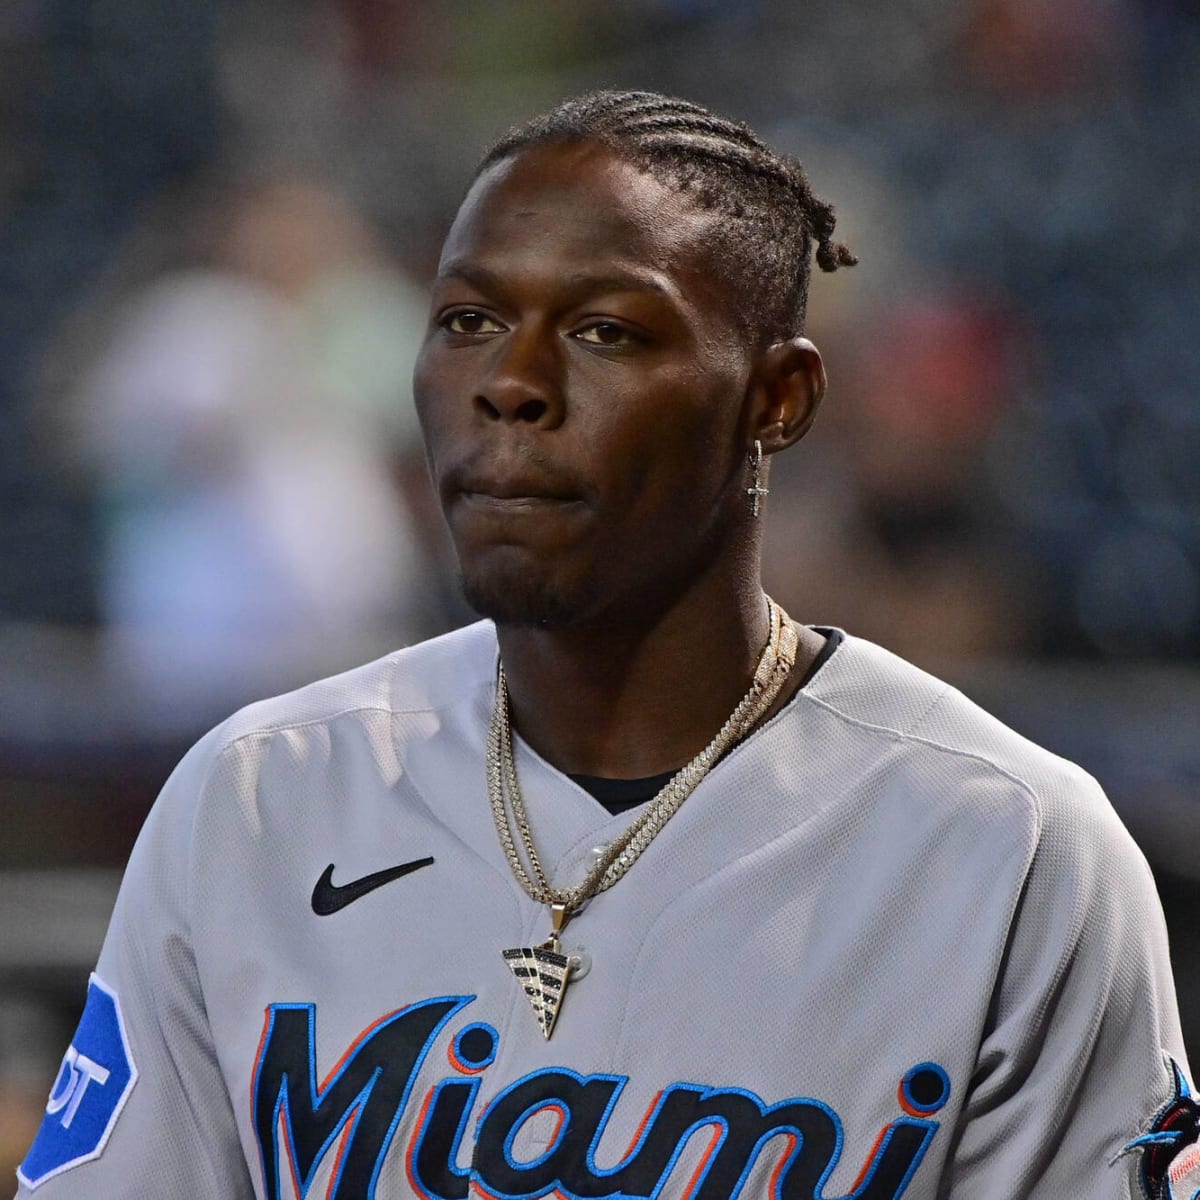 Marlins star outfielder Jazz Chisholm Jr. headed to the injured